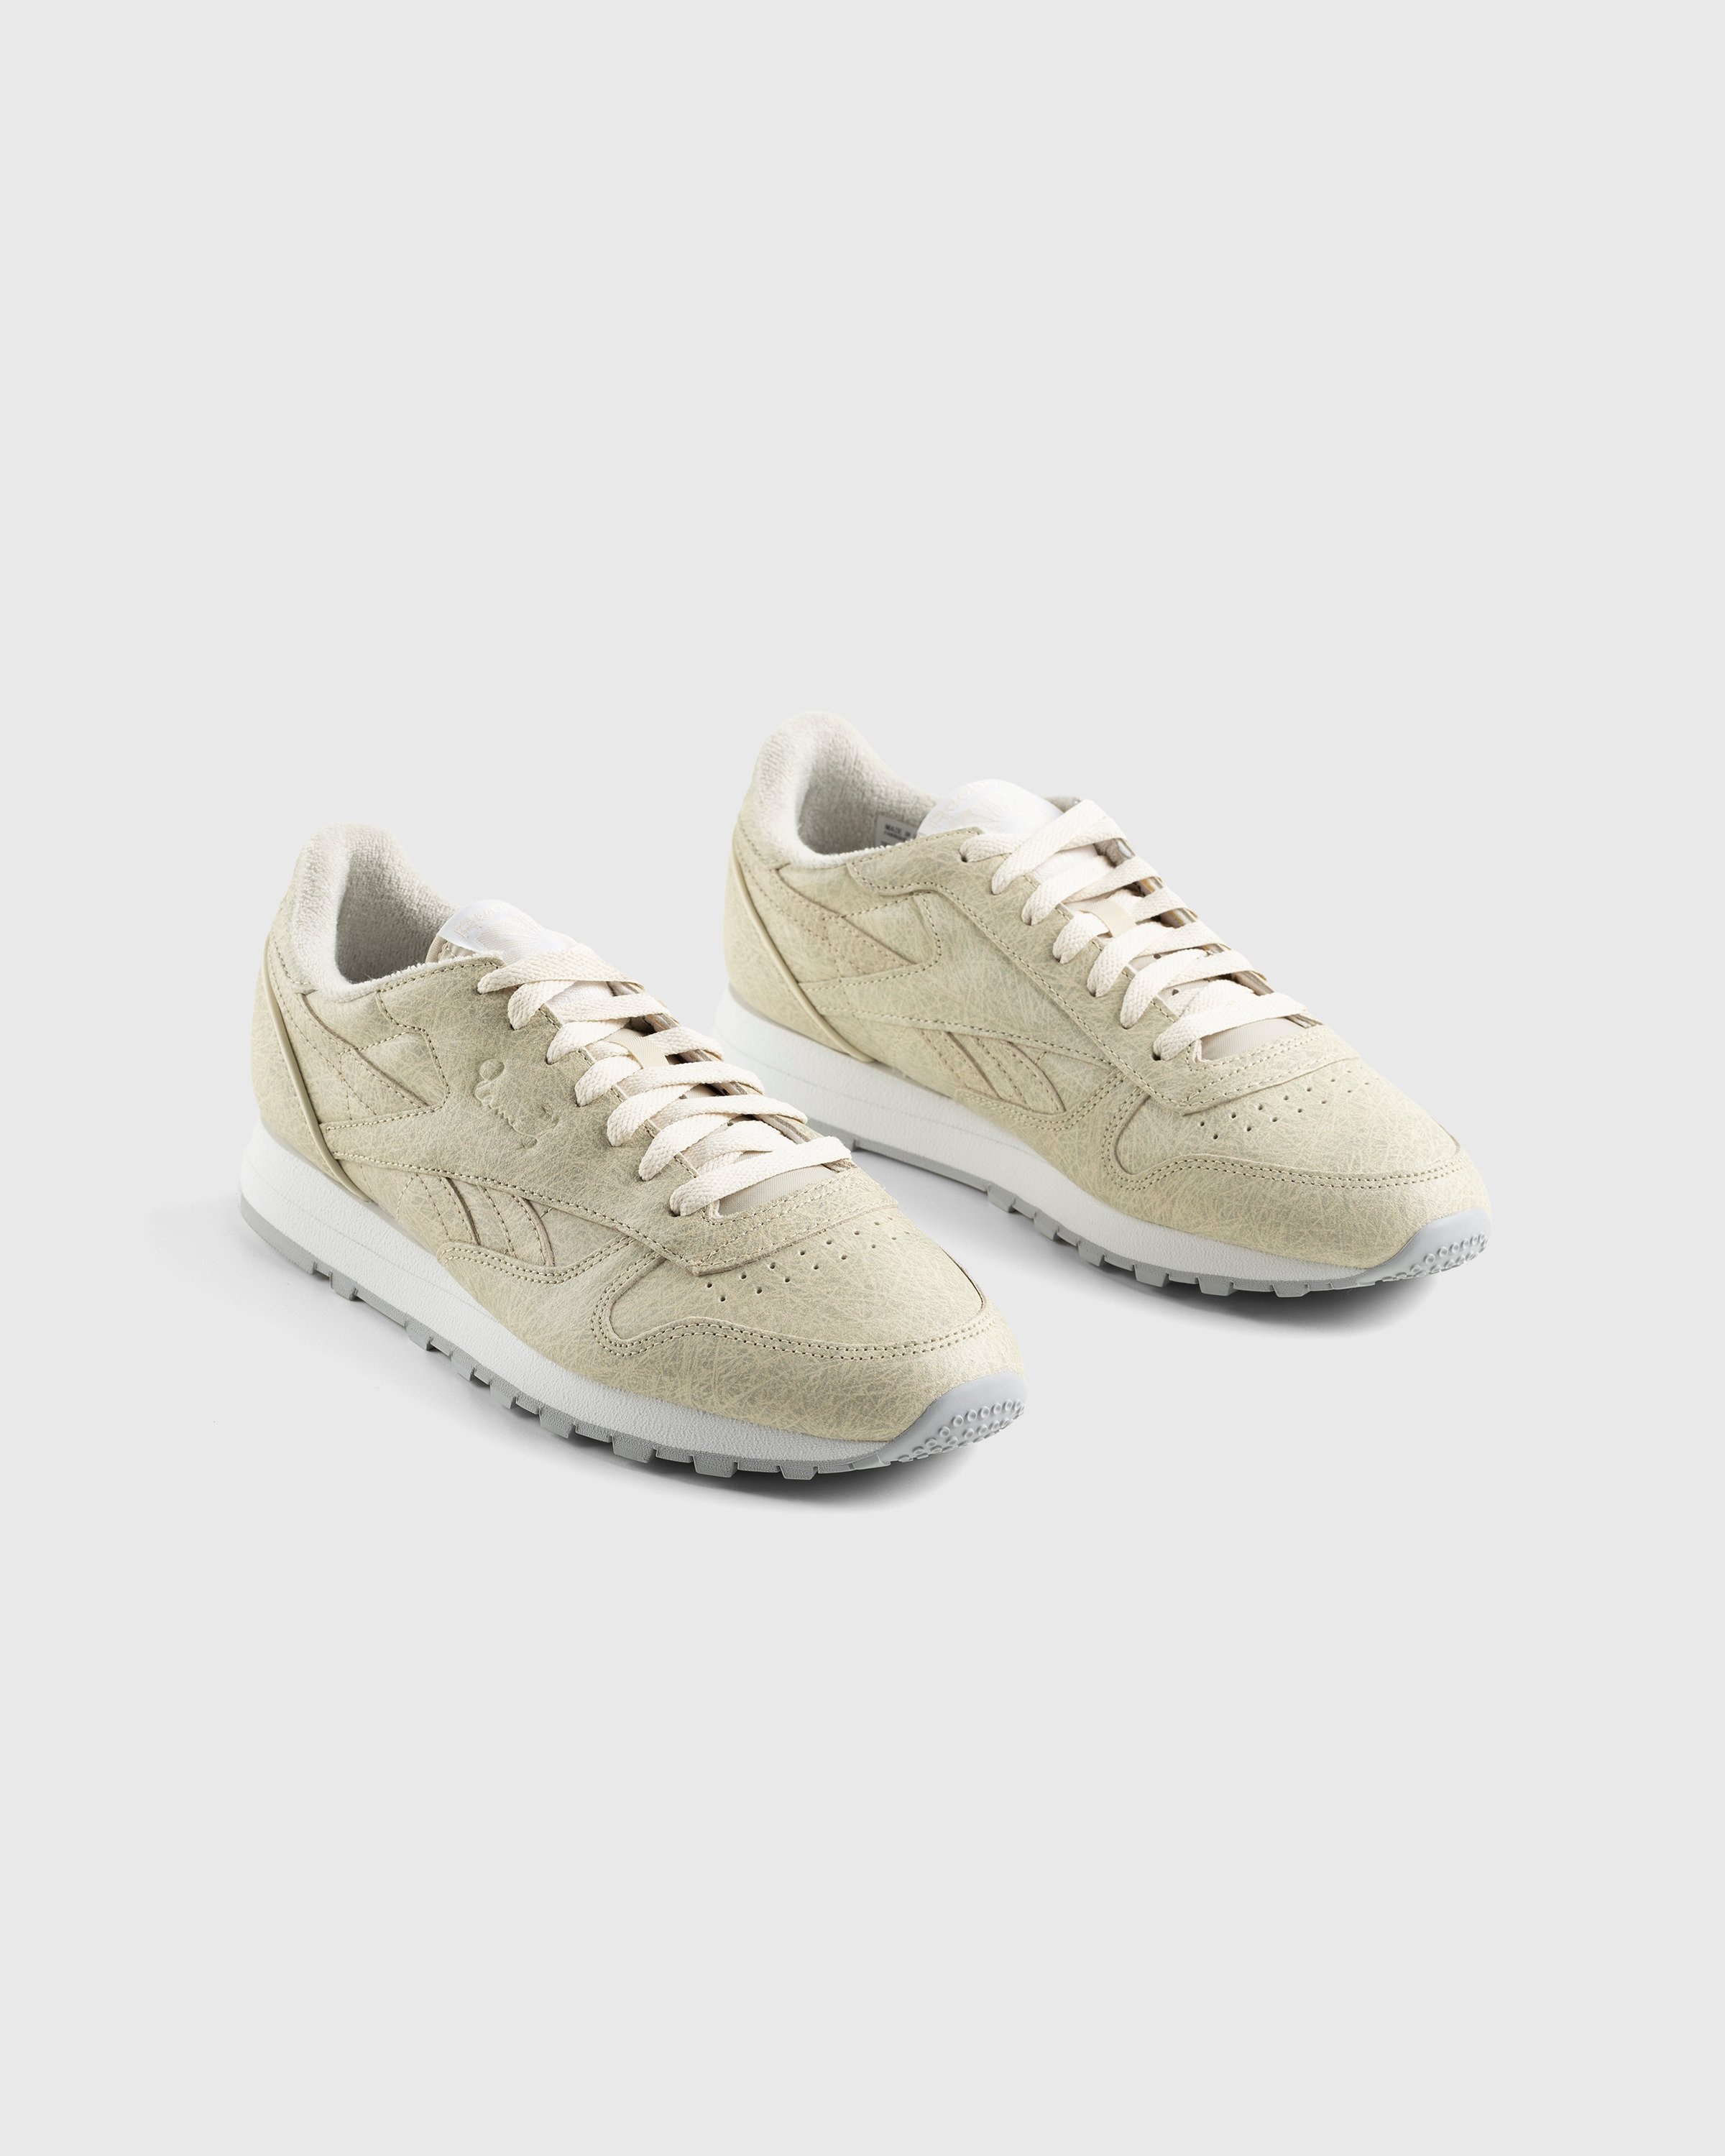 Reebok – Eames Classic Leather Sand - Low Top Sneakers - Beige - Image 3